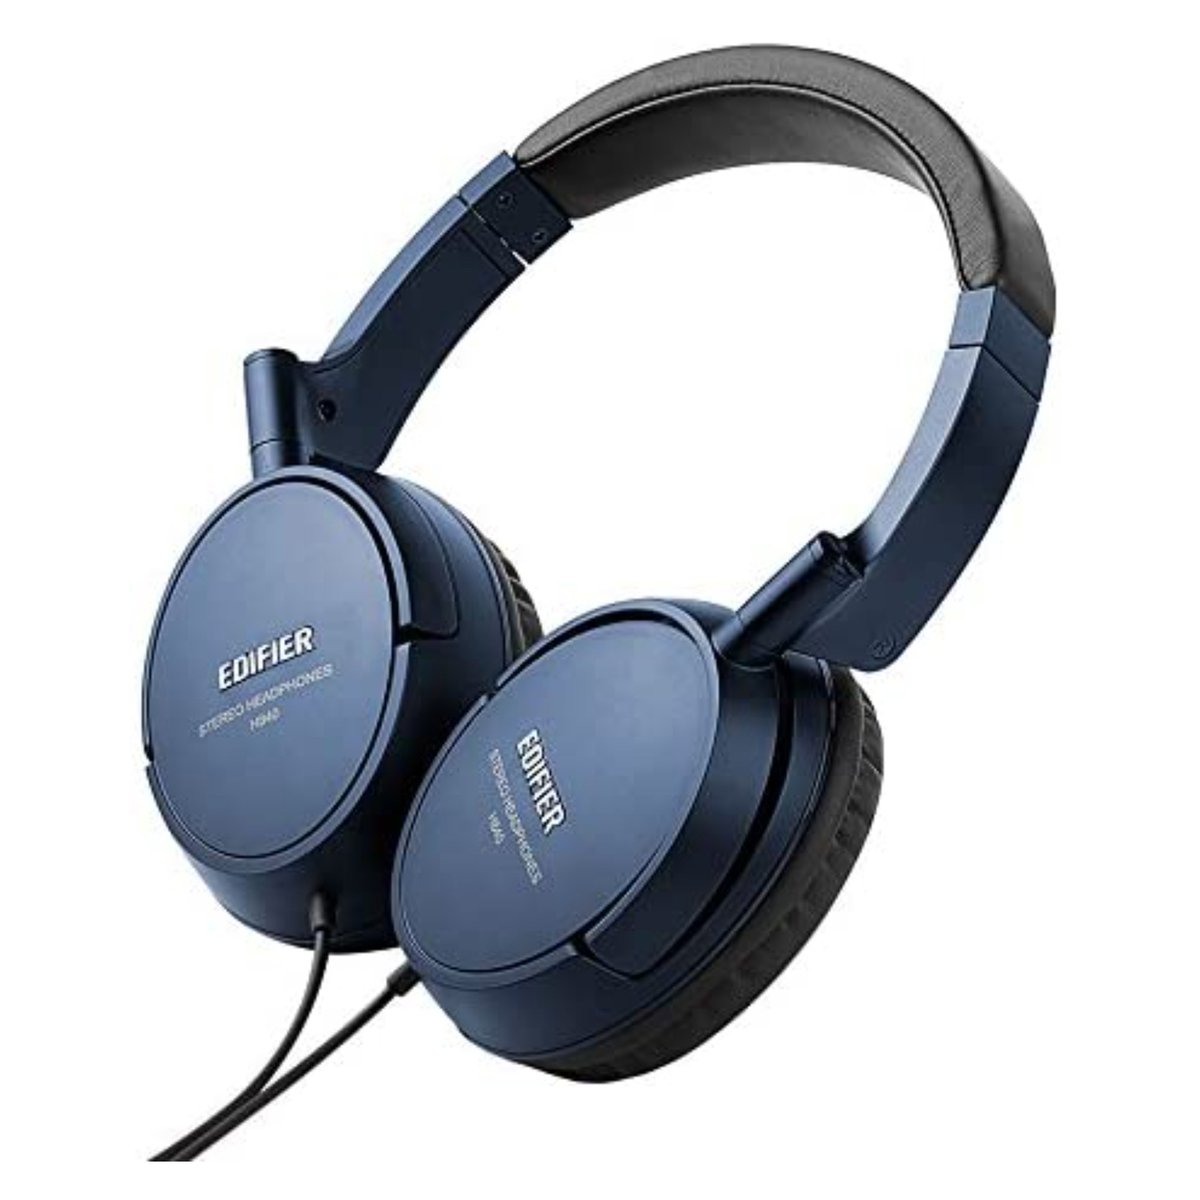 Edifier Wired Stereo Headset H840 Blue